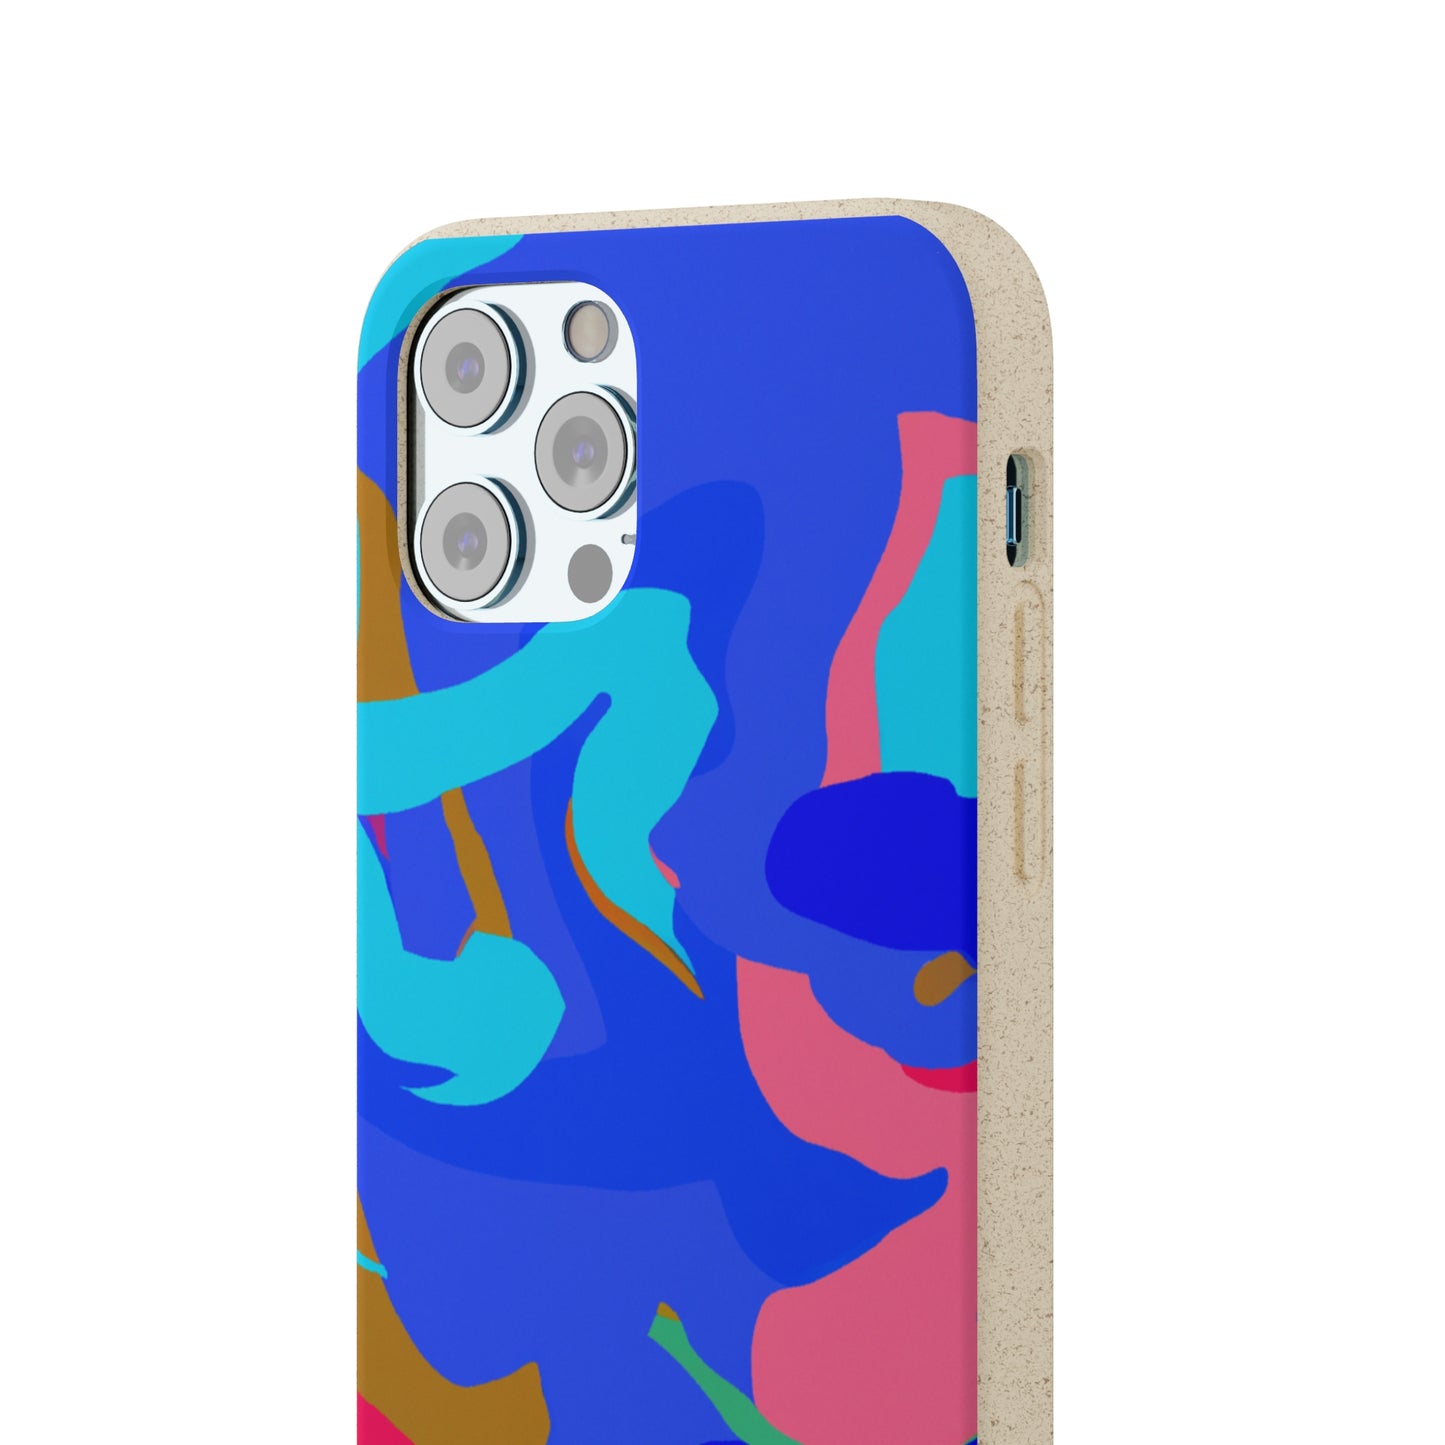 "Dynamic Balance: An Abstract Exploration of Motion Through Color and Shapes" - Bam Boo! Lifestyle Eco-friendly Cases